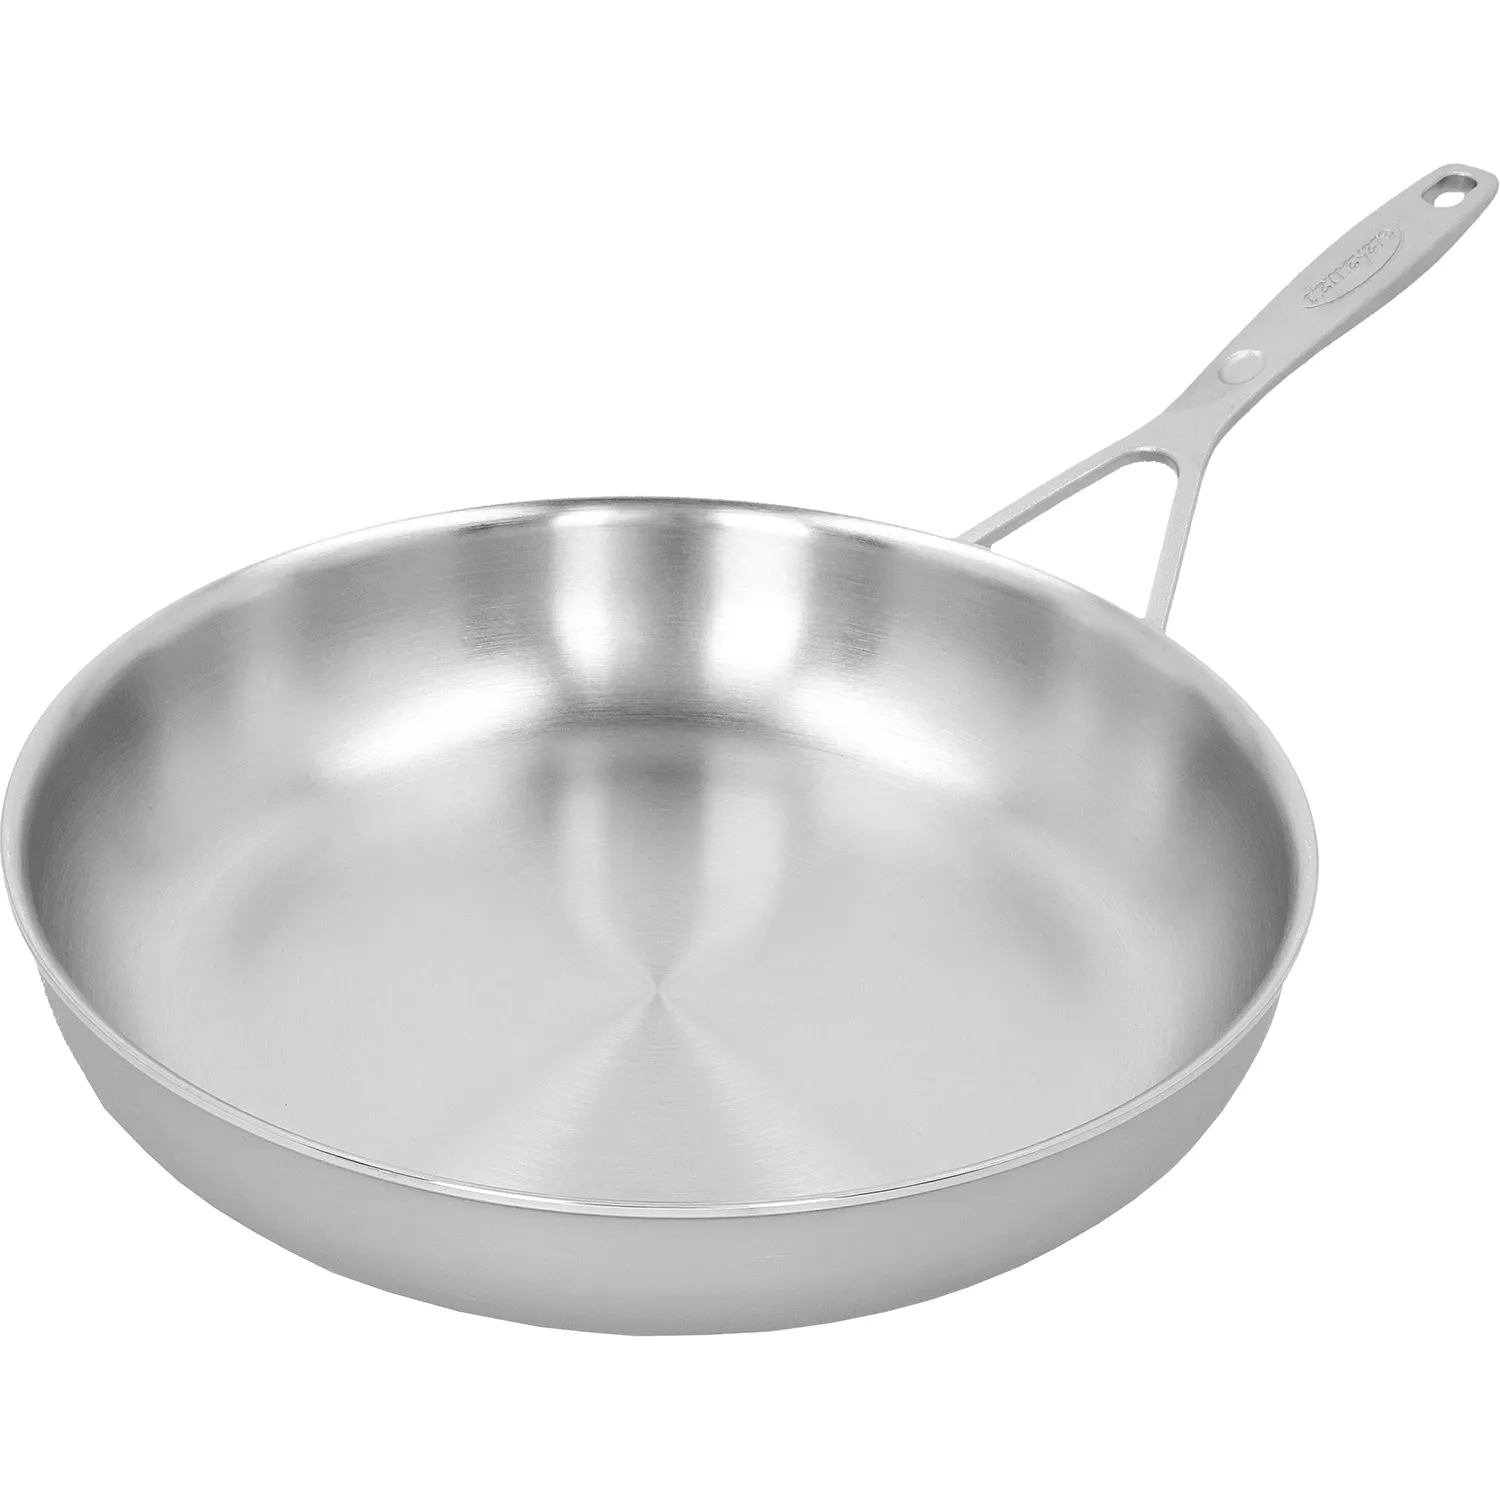 Photos - Pan Demeyere Industry5 Stainless Steel Skillets 48628 